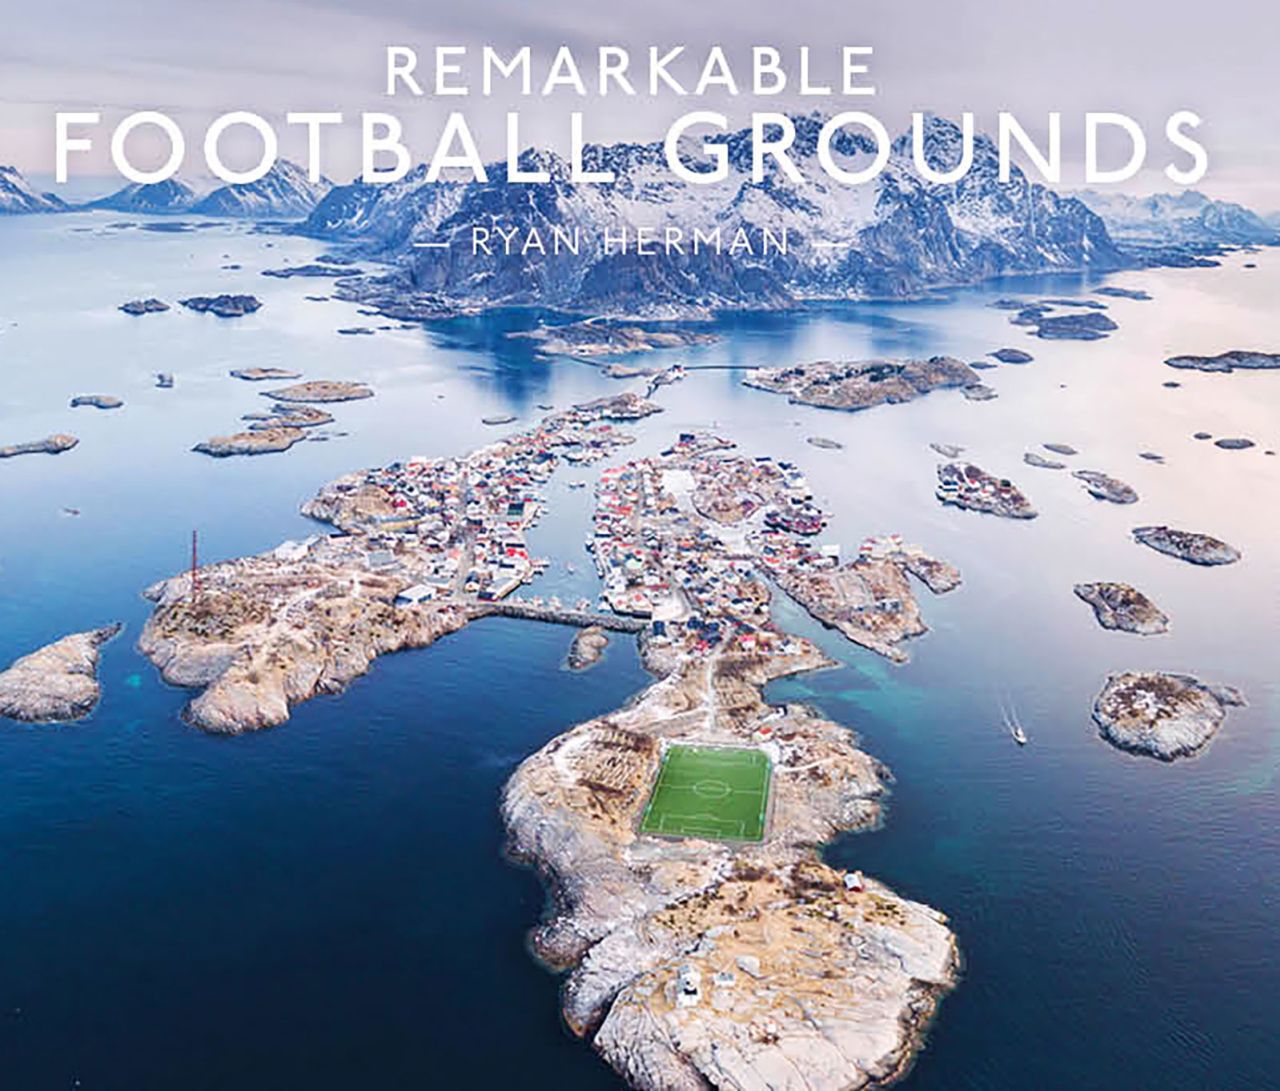 Remarkable Football Grounds by Ryan Herman